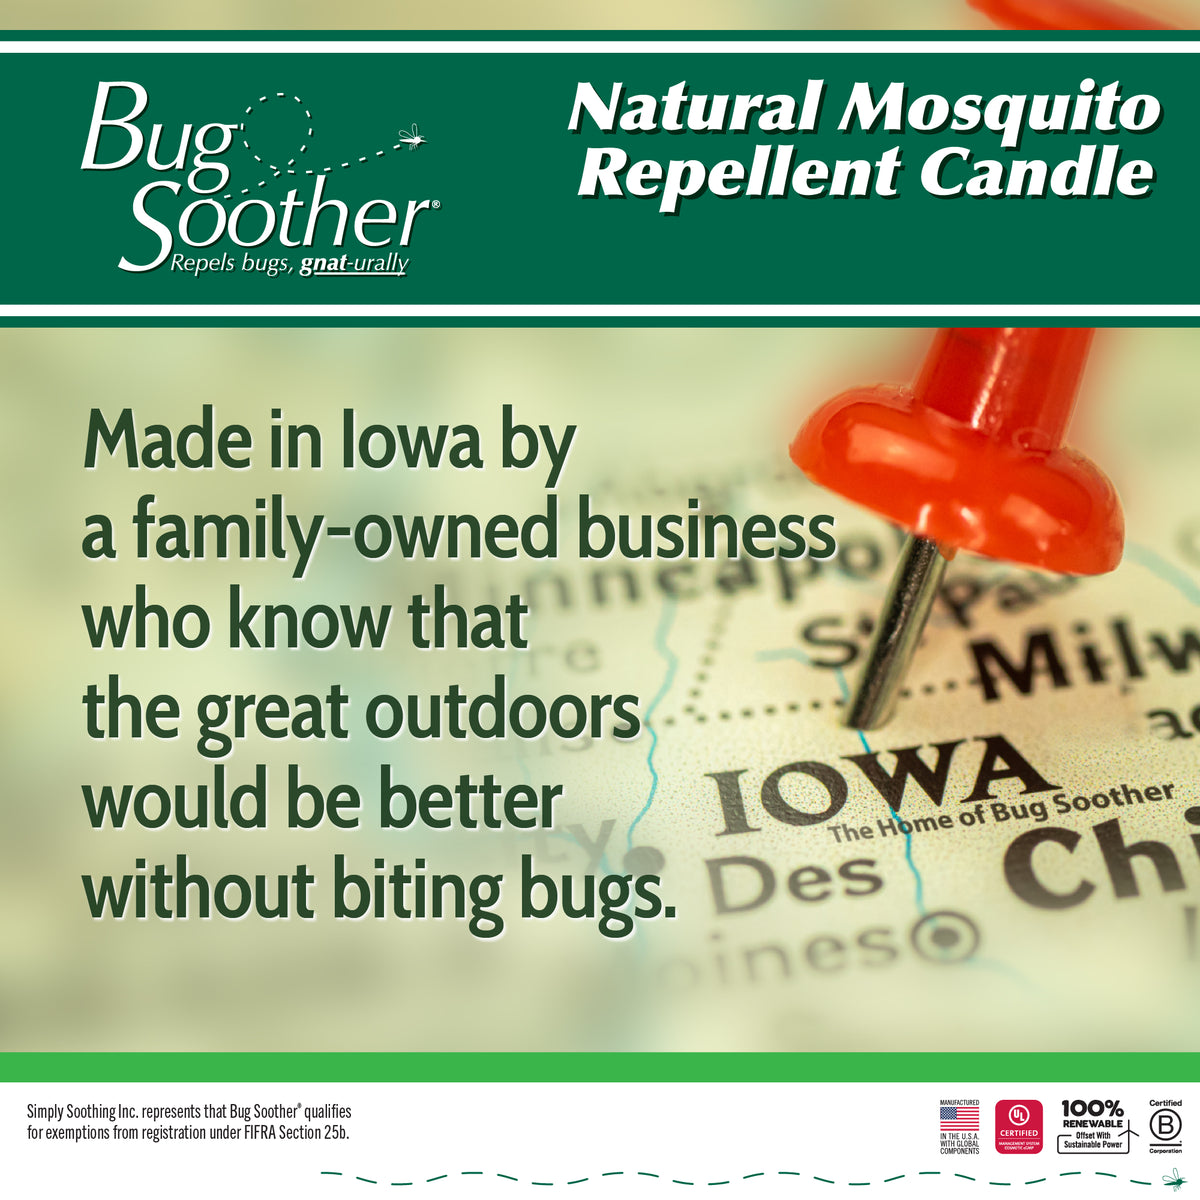 Bug Soother Insect Repellent Candle + 1 oz. Spray Bottle Pack, 2-count